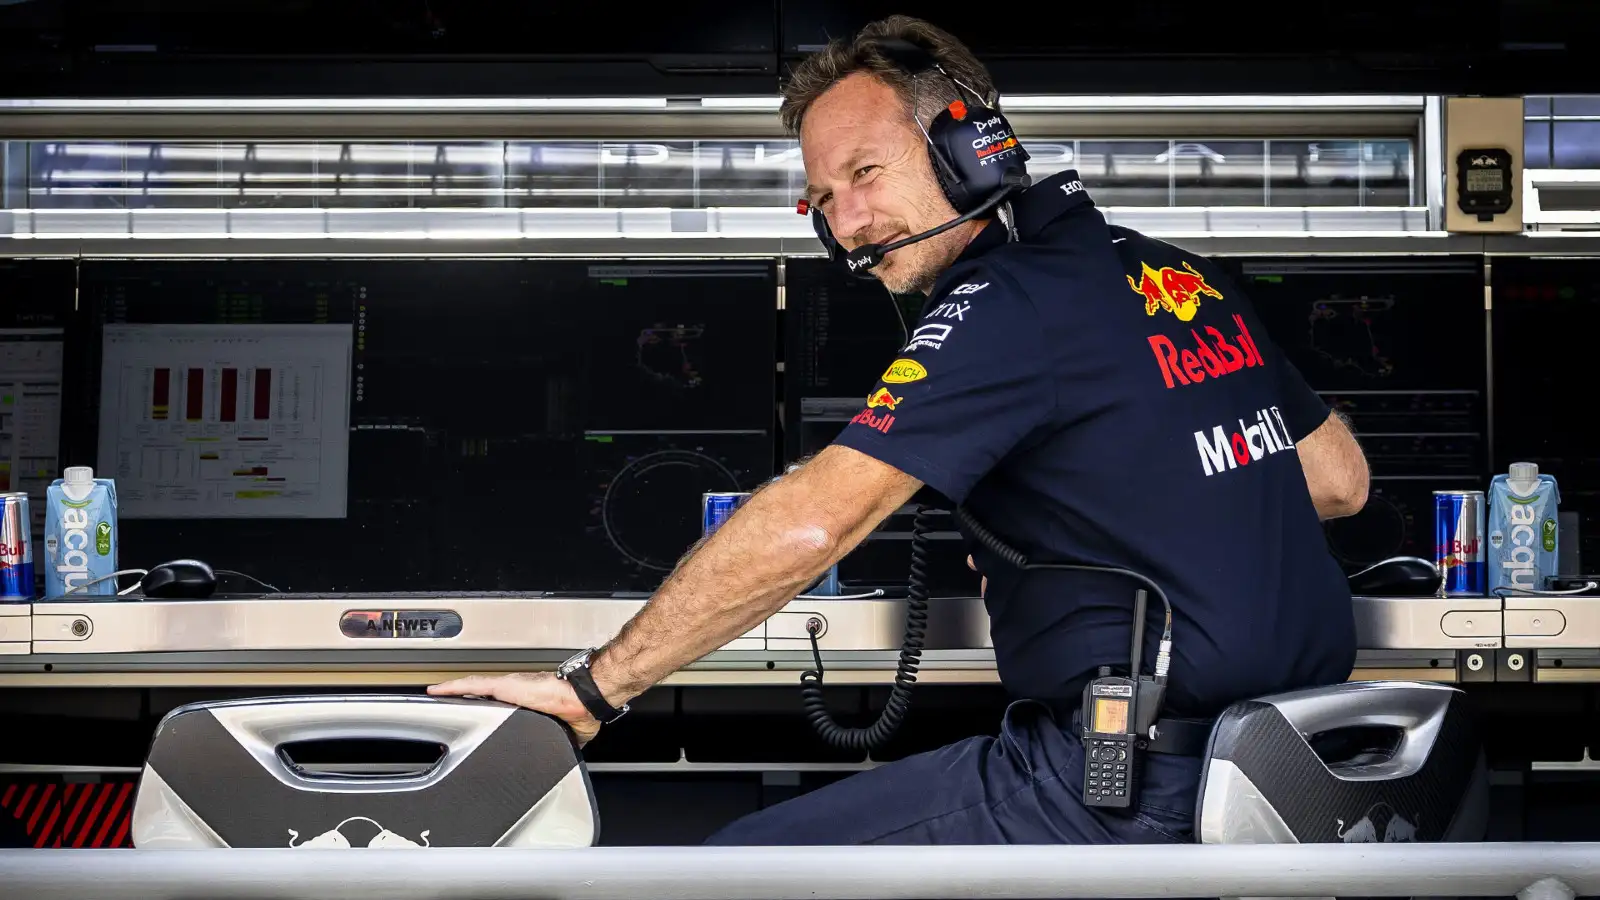 Christian Horner on the Red Bull pitwall. Budapest, July 2022.